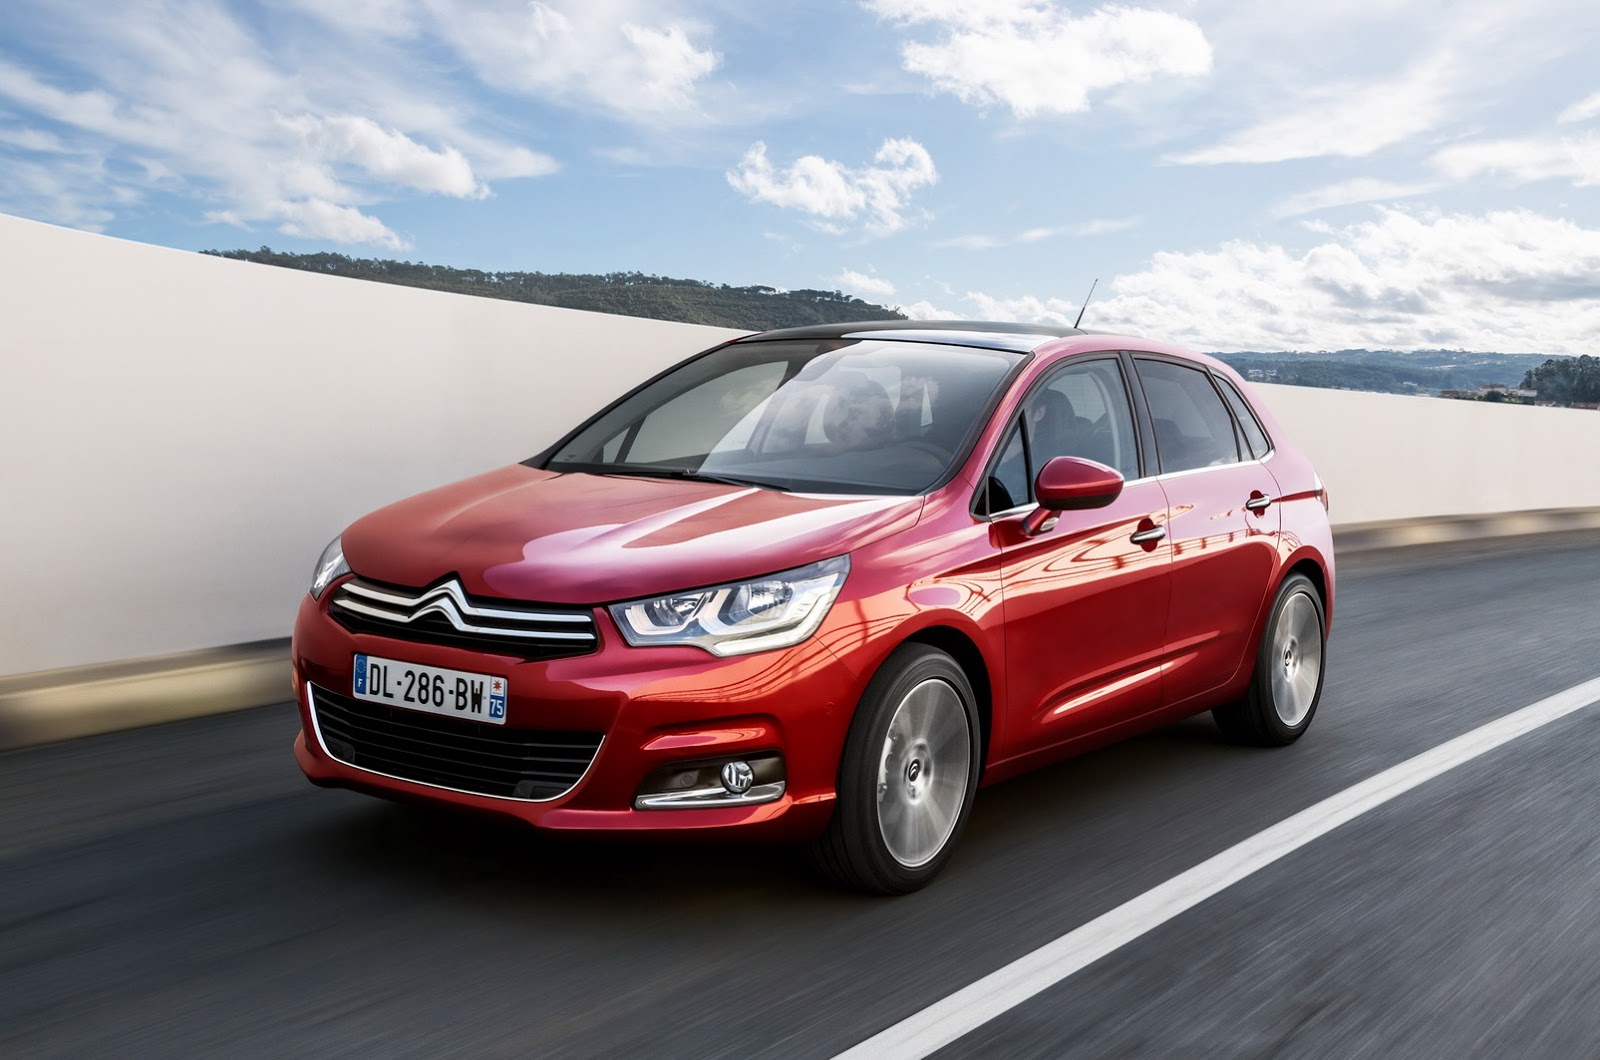 Refreshed Citroen C4 Now Available To Order in the UK [76 Pics & Video]